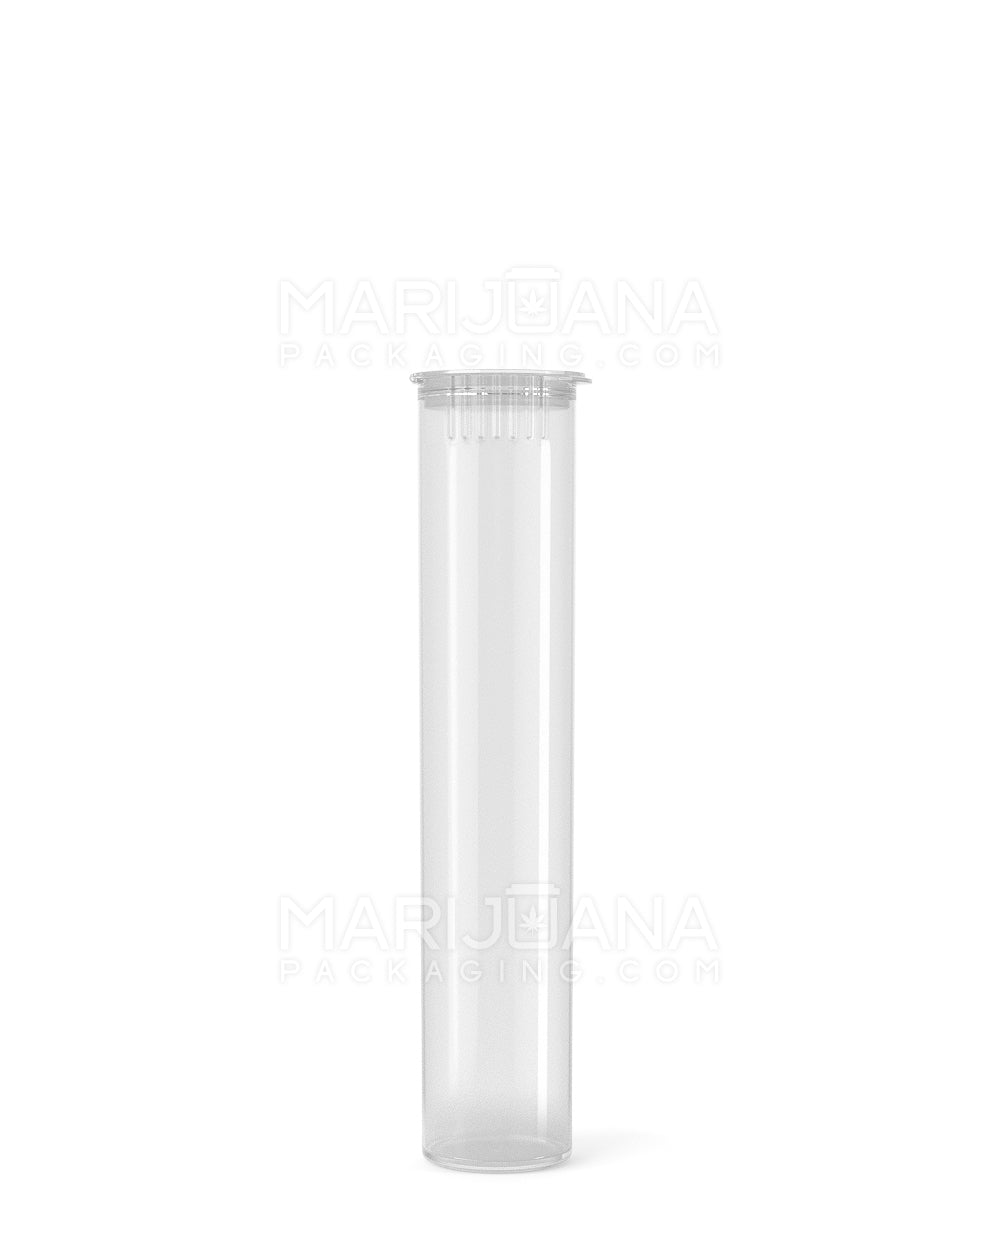 Child Resistant | Pop Top Plastic Pre-Roll Tubes | 78mm - Clear - 1200 Count - 2